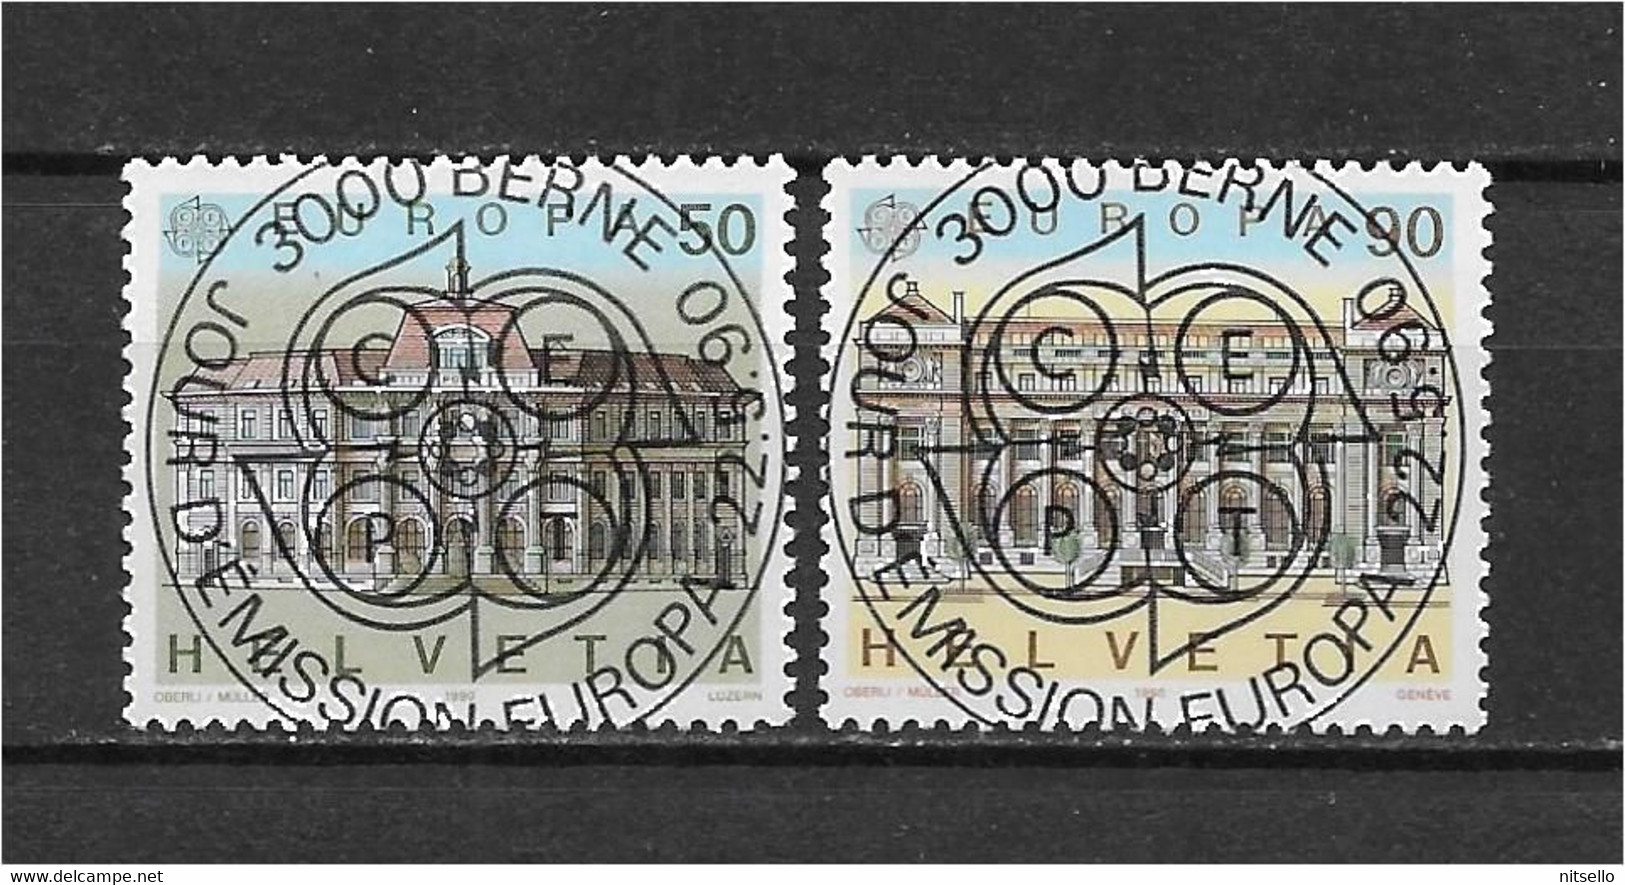 LOTE 1530A /// SUIZA YVERT Nº: 1347/1348  ¡¡¡ OFERTA - LIQUIDATION - JE LIQUIDE !!! - Used Stamps